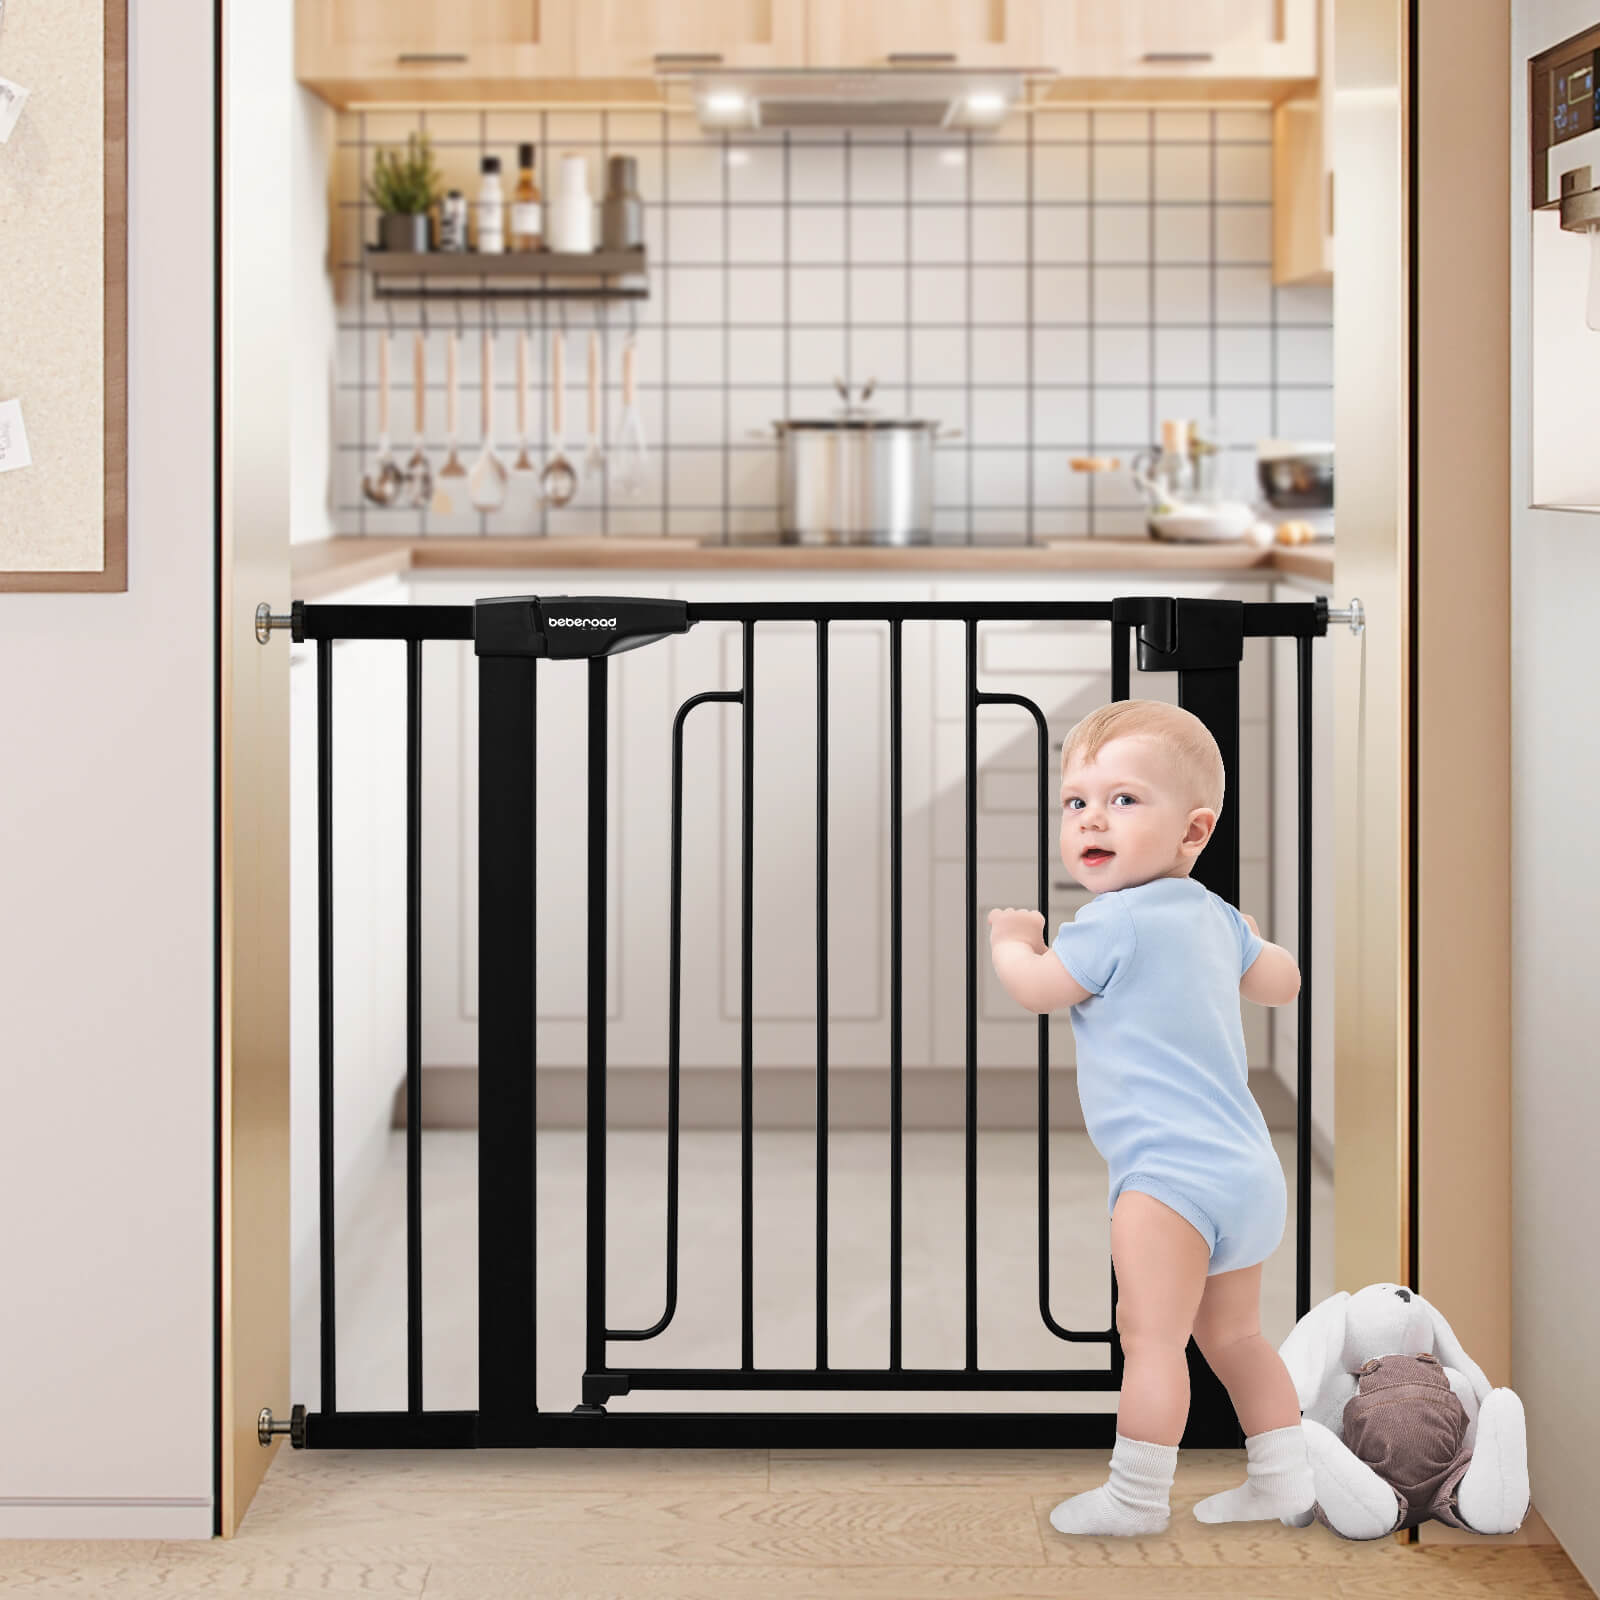 The Safety Gate